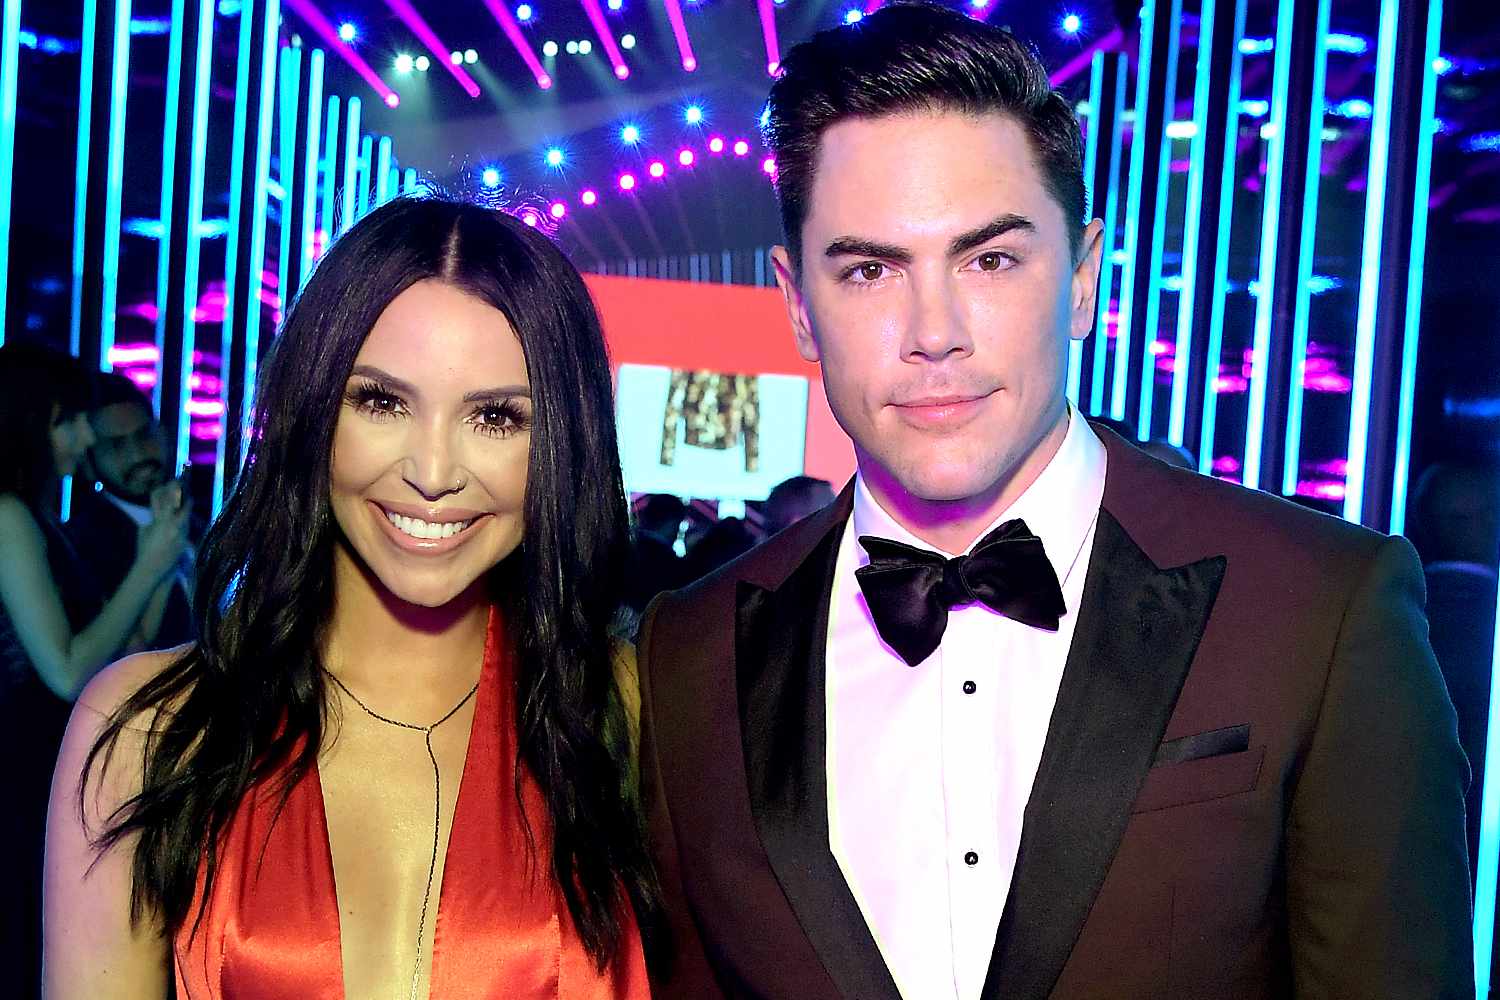 Scheana Shay and Tom Sandoval arrive to the 2018 E! People's Choice Awards held at the Barker Hangar on November 11, 2018